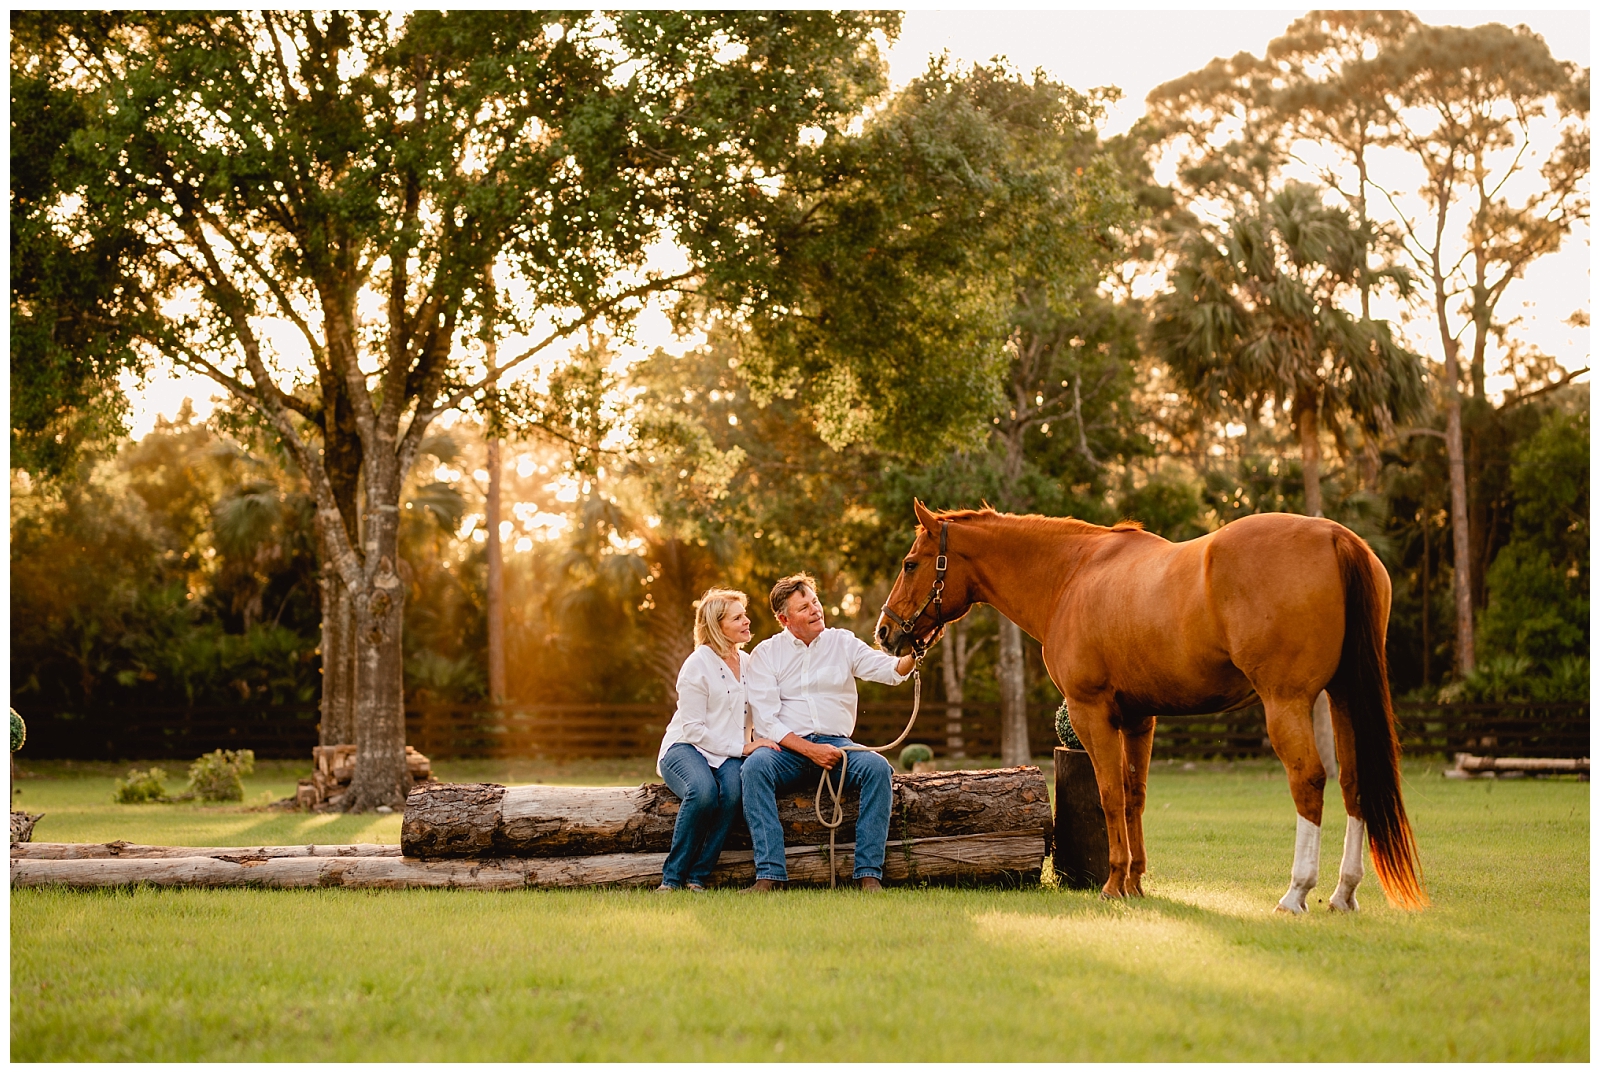 Equestrian couples photoshoot near Jupiter, FL. - Julie, Mark, and Cayenne at Summerwood Stables